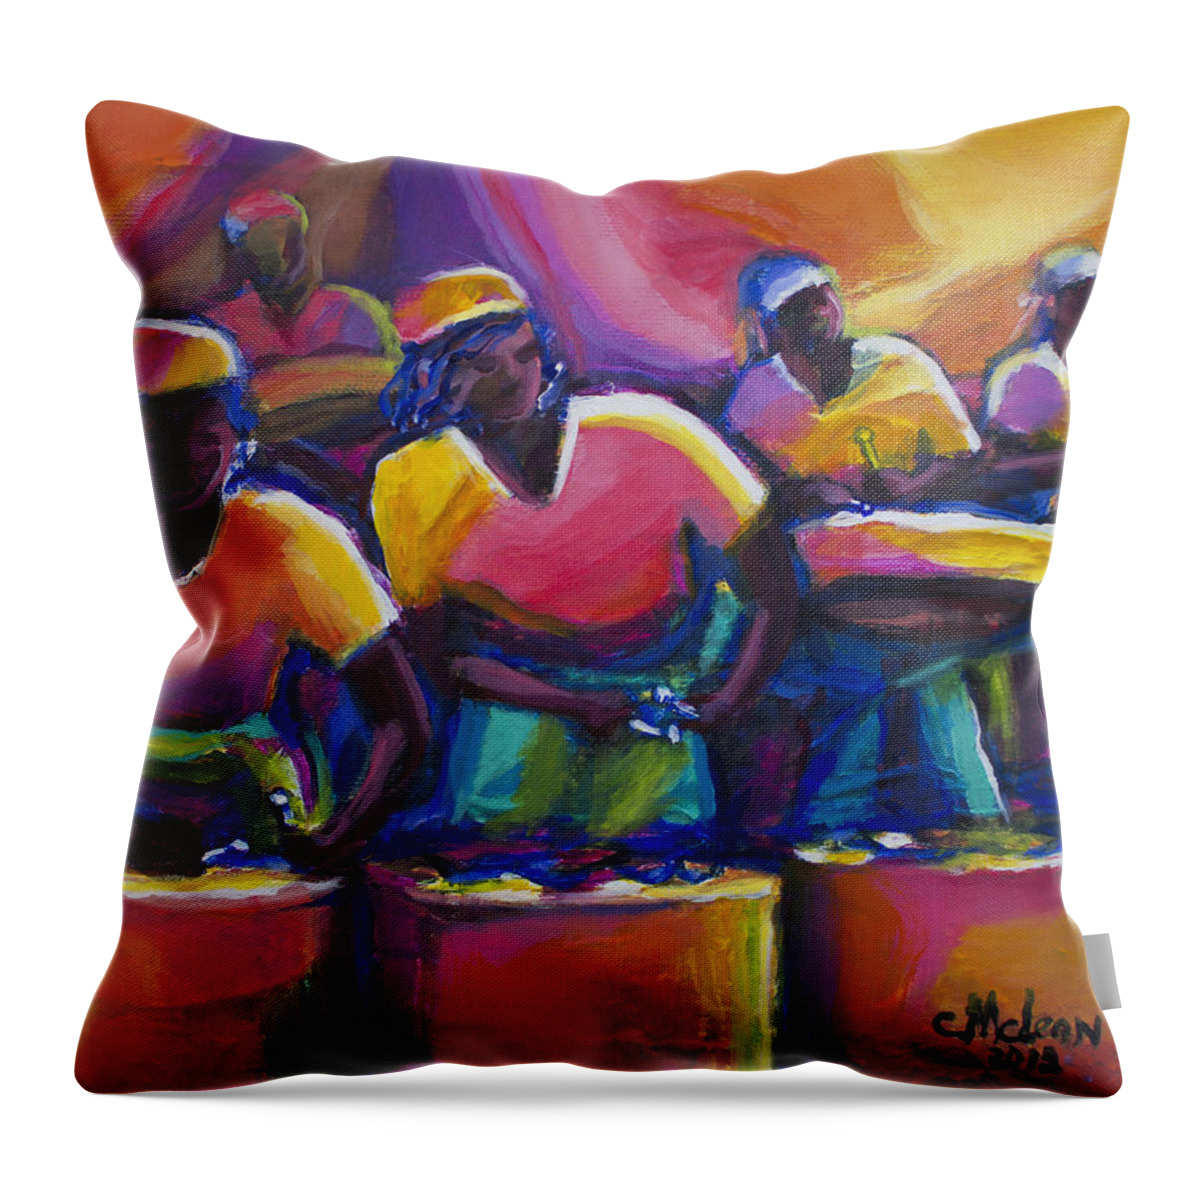 Abstract Throw Pillow featuring the painting Steel Pan by Cynthia McLean